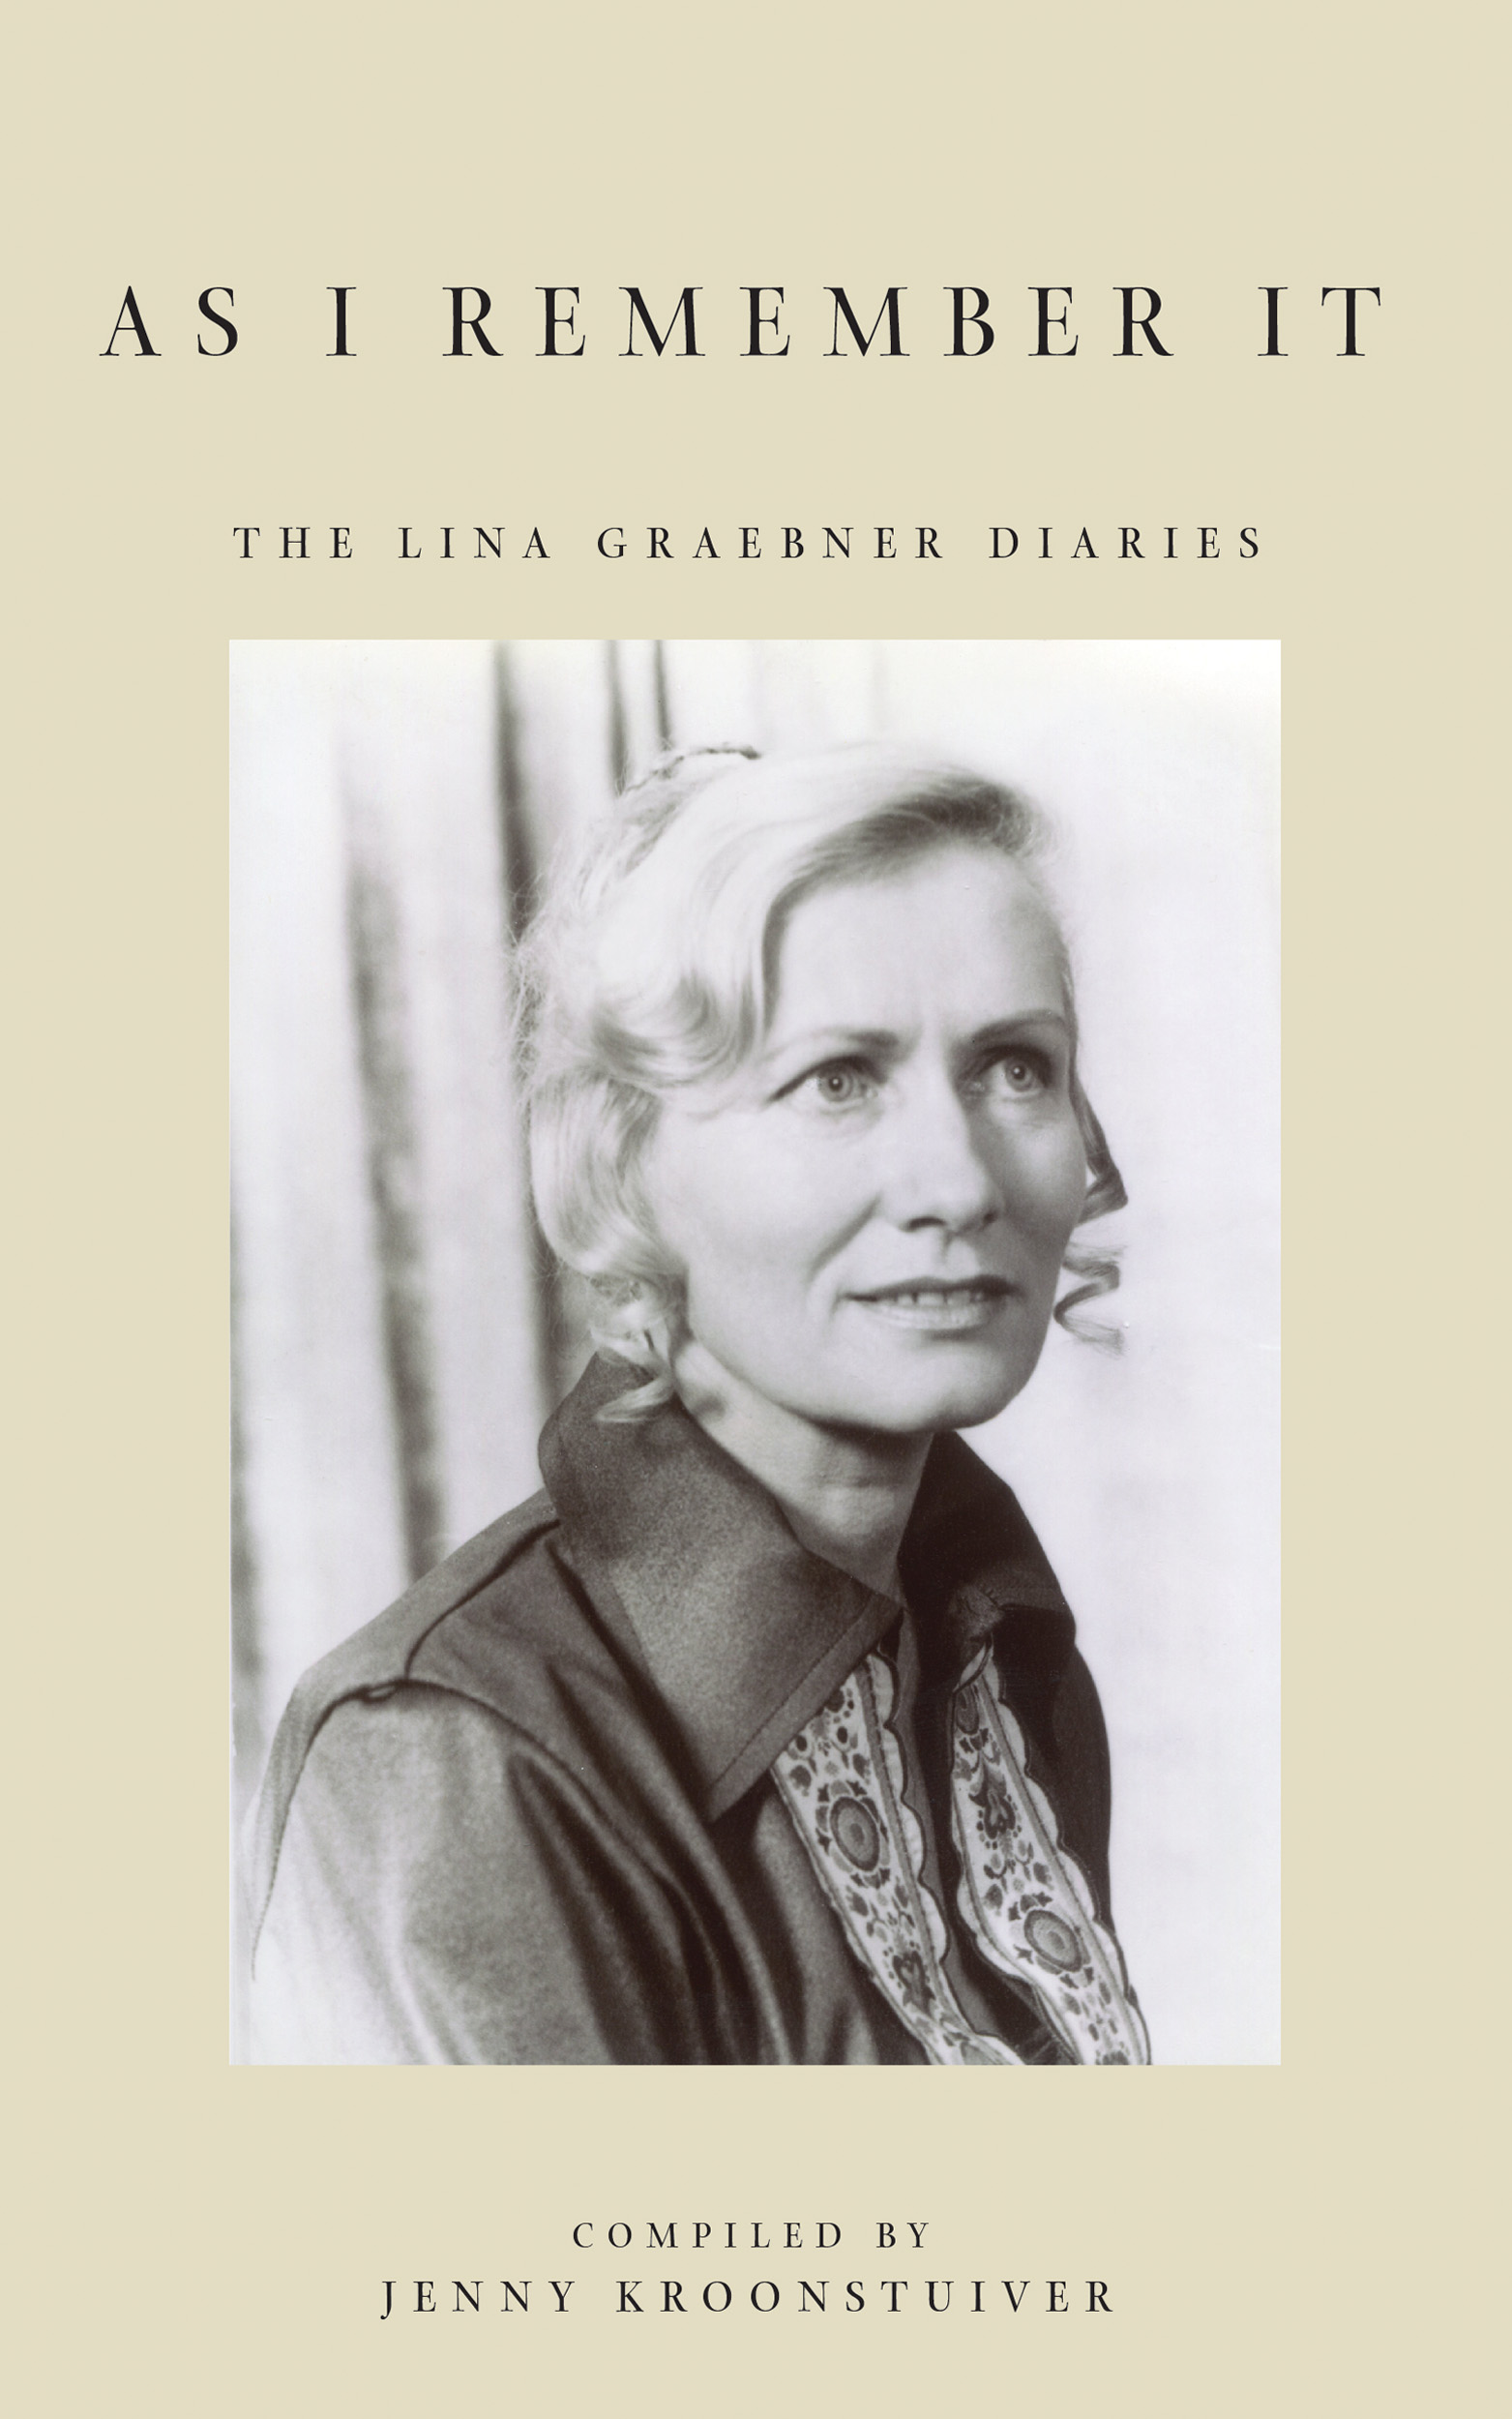 As I remember it: The Lina Graebner Diaries